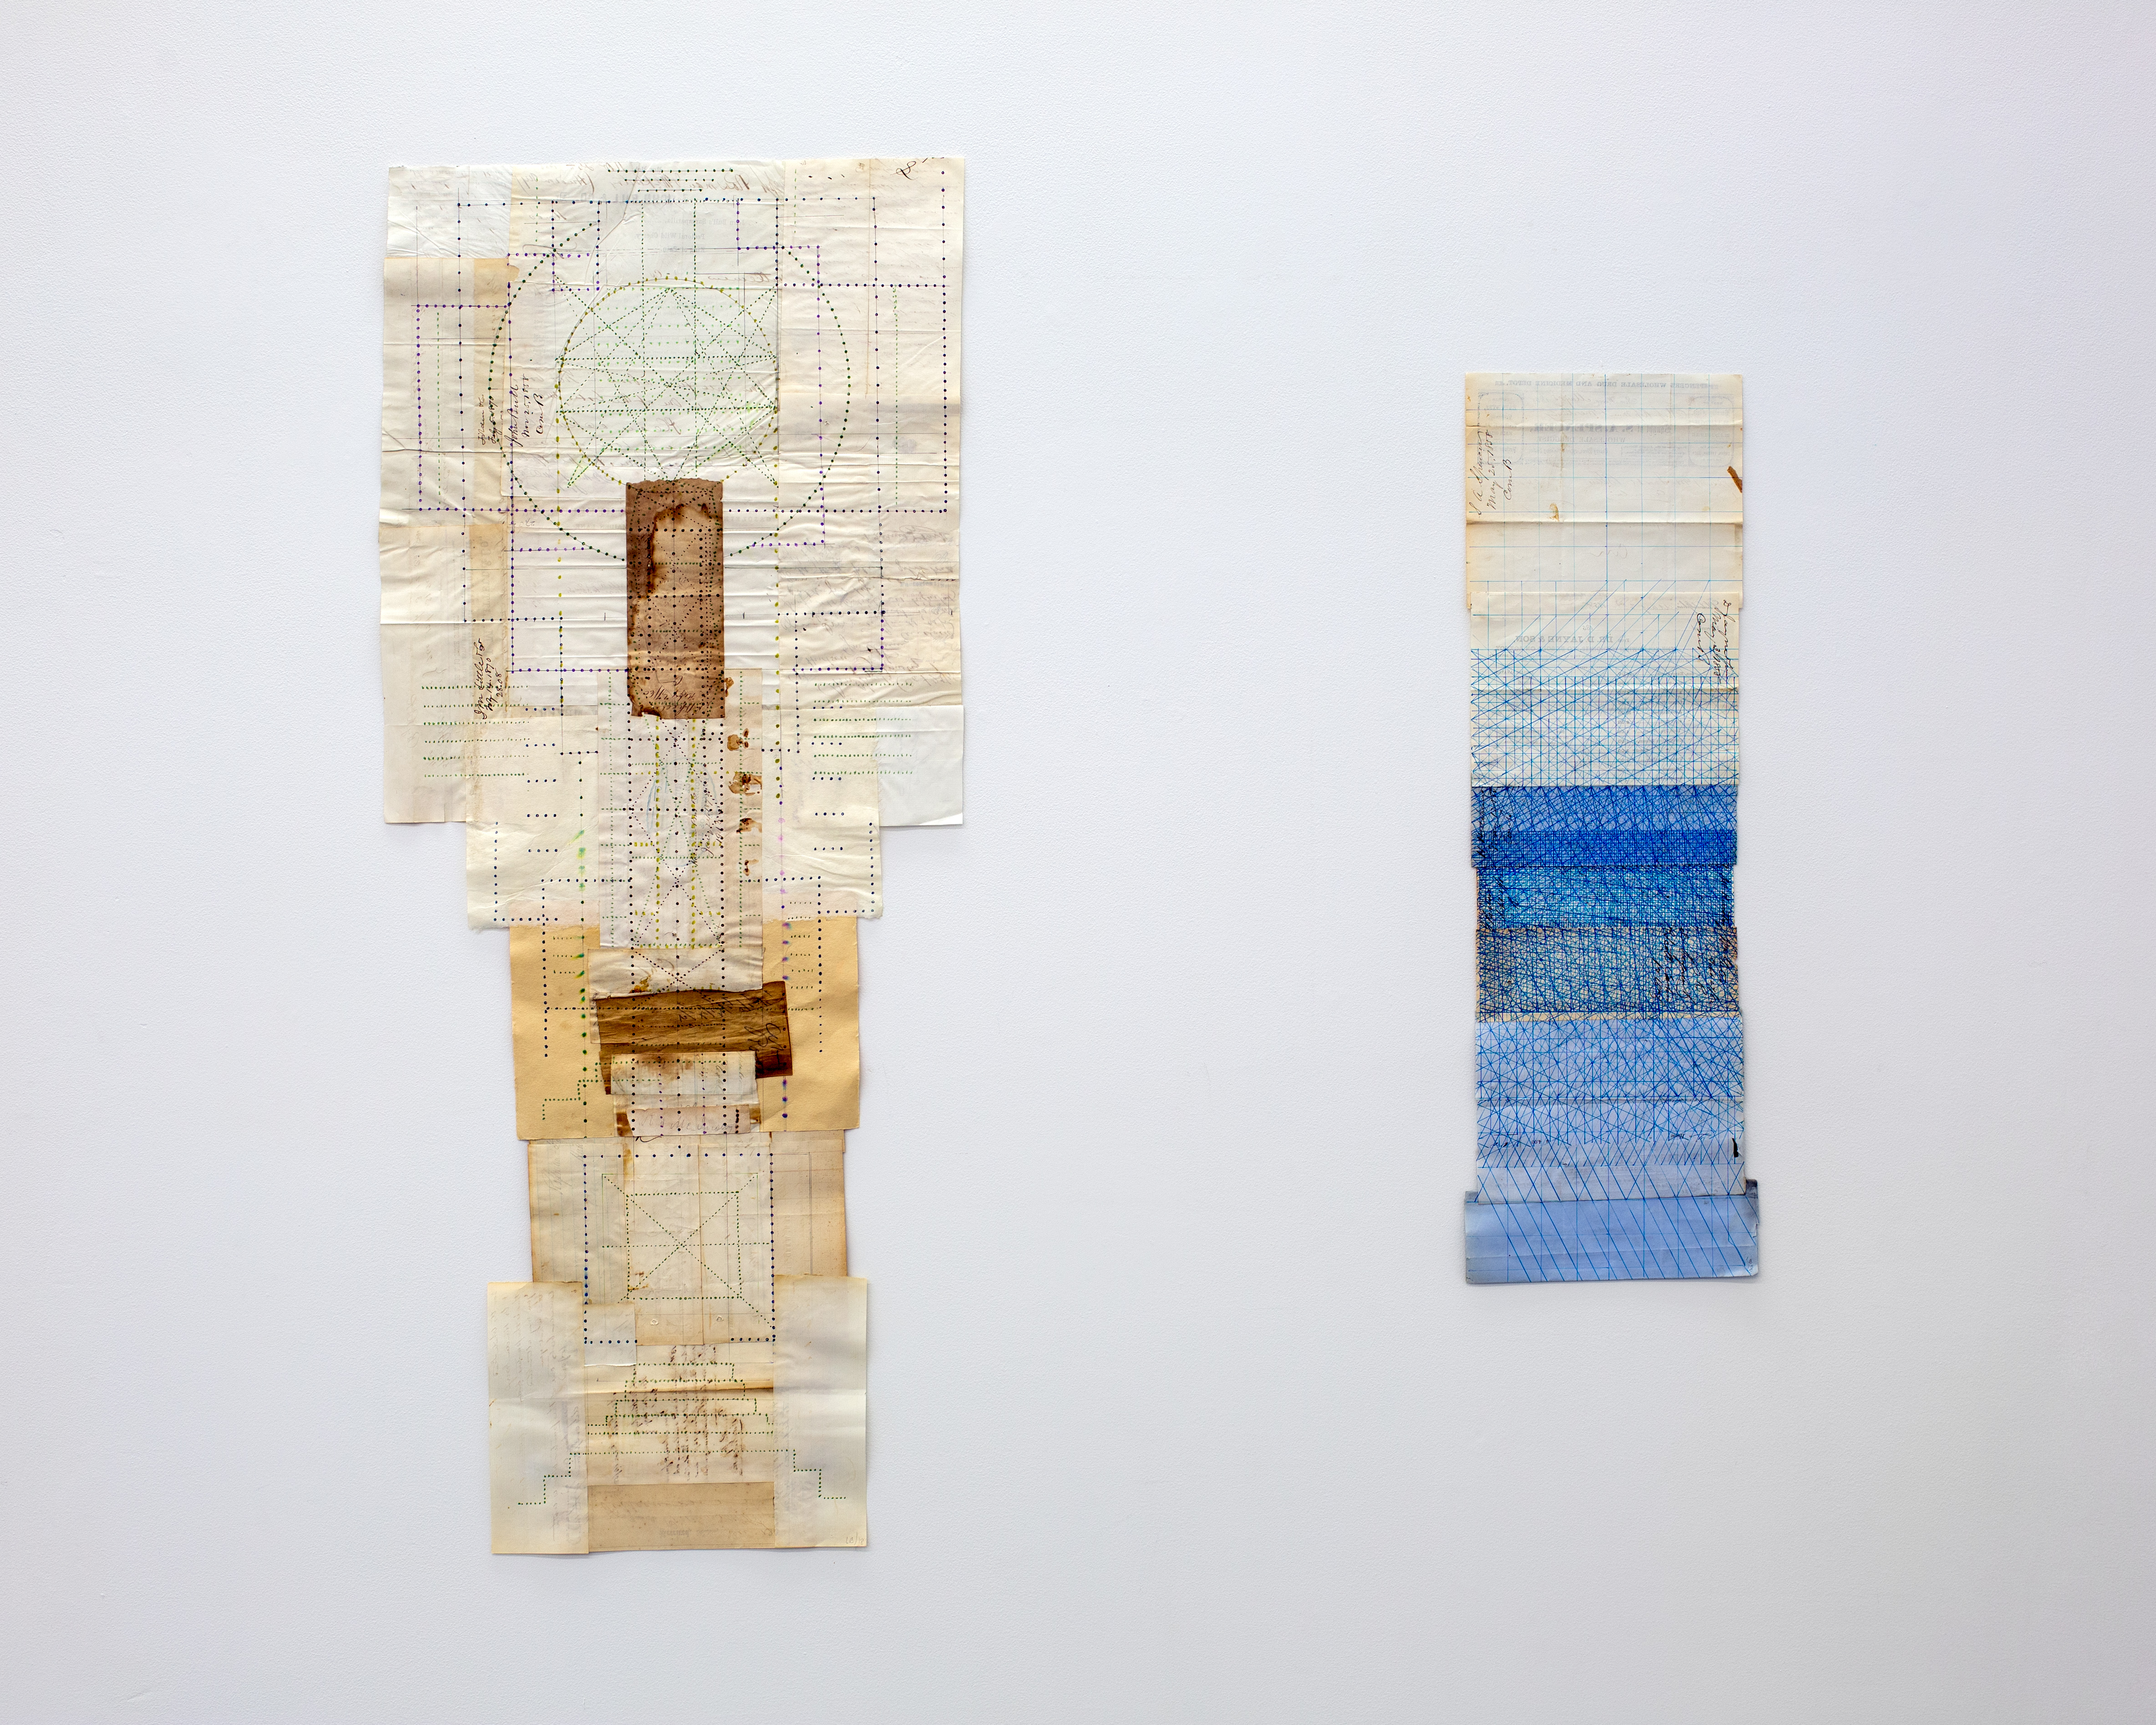 Laura Battle, Cathedral, 2019, Ink on antique paper, 40h x 17w in. (Left) and Ledger Drawing, 2018, Ink on antique paper, 26h x 8w in. (Right)